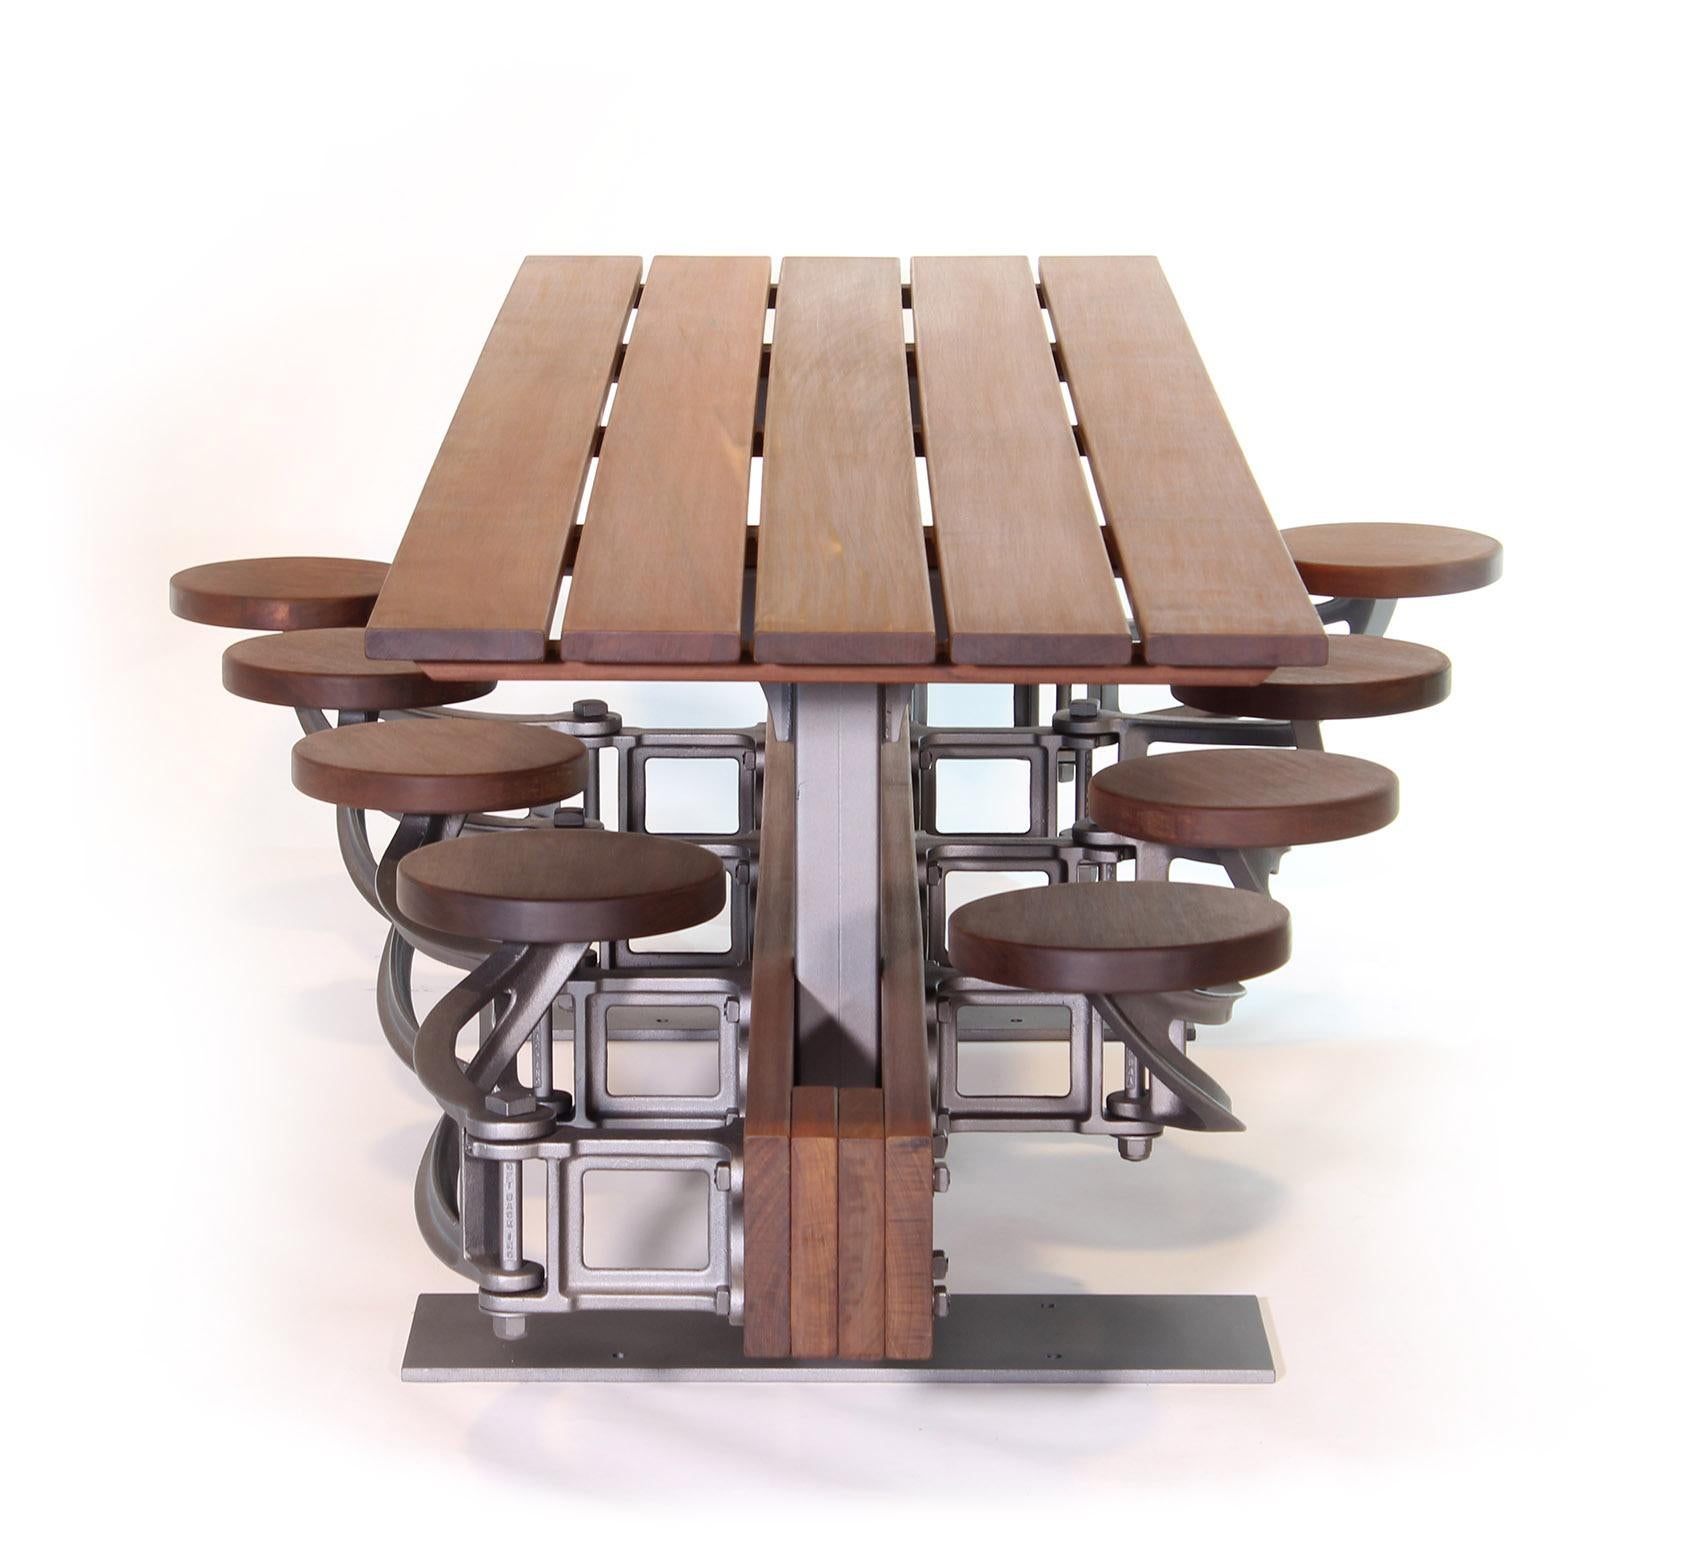 Swing-Out-Seat Outdoor Dining Table Set 11